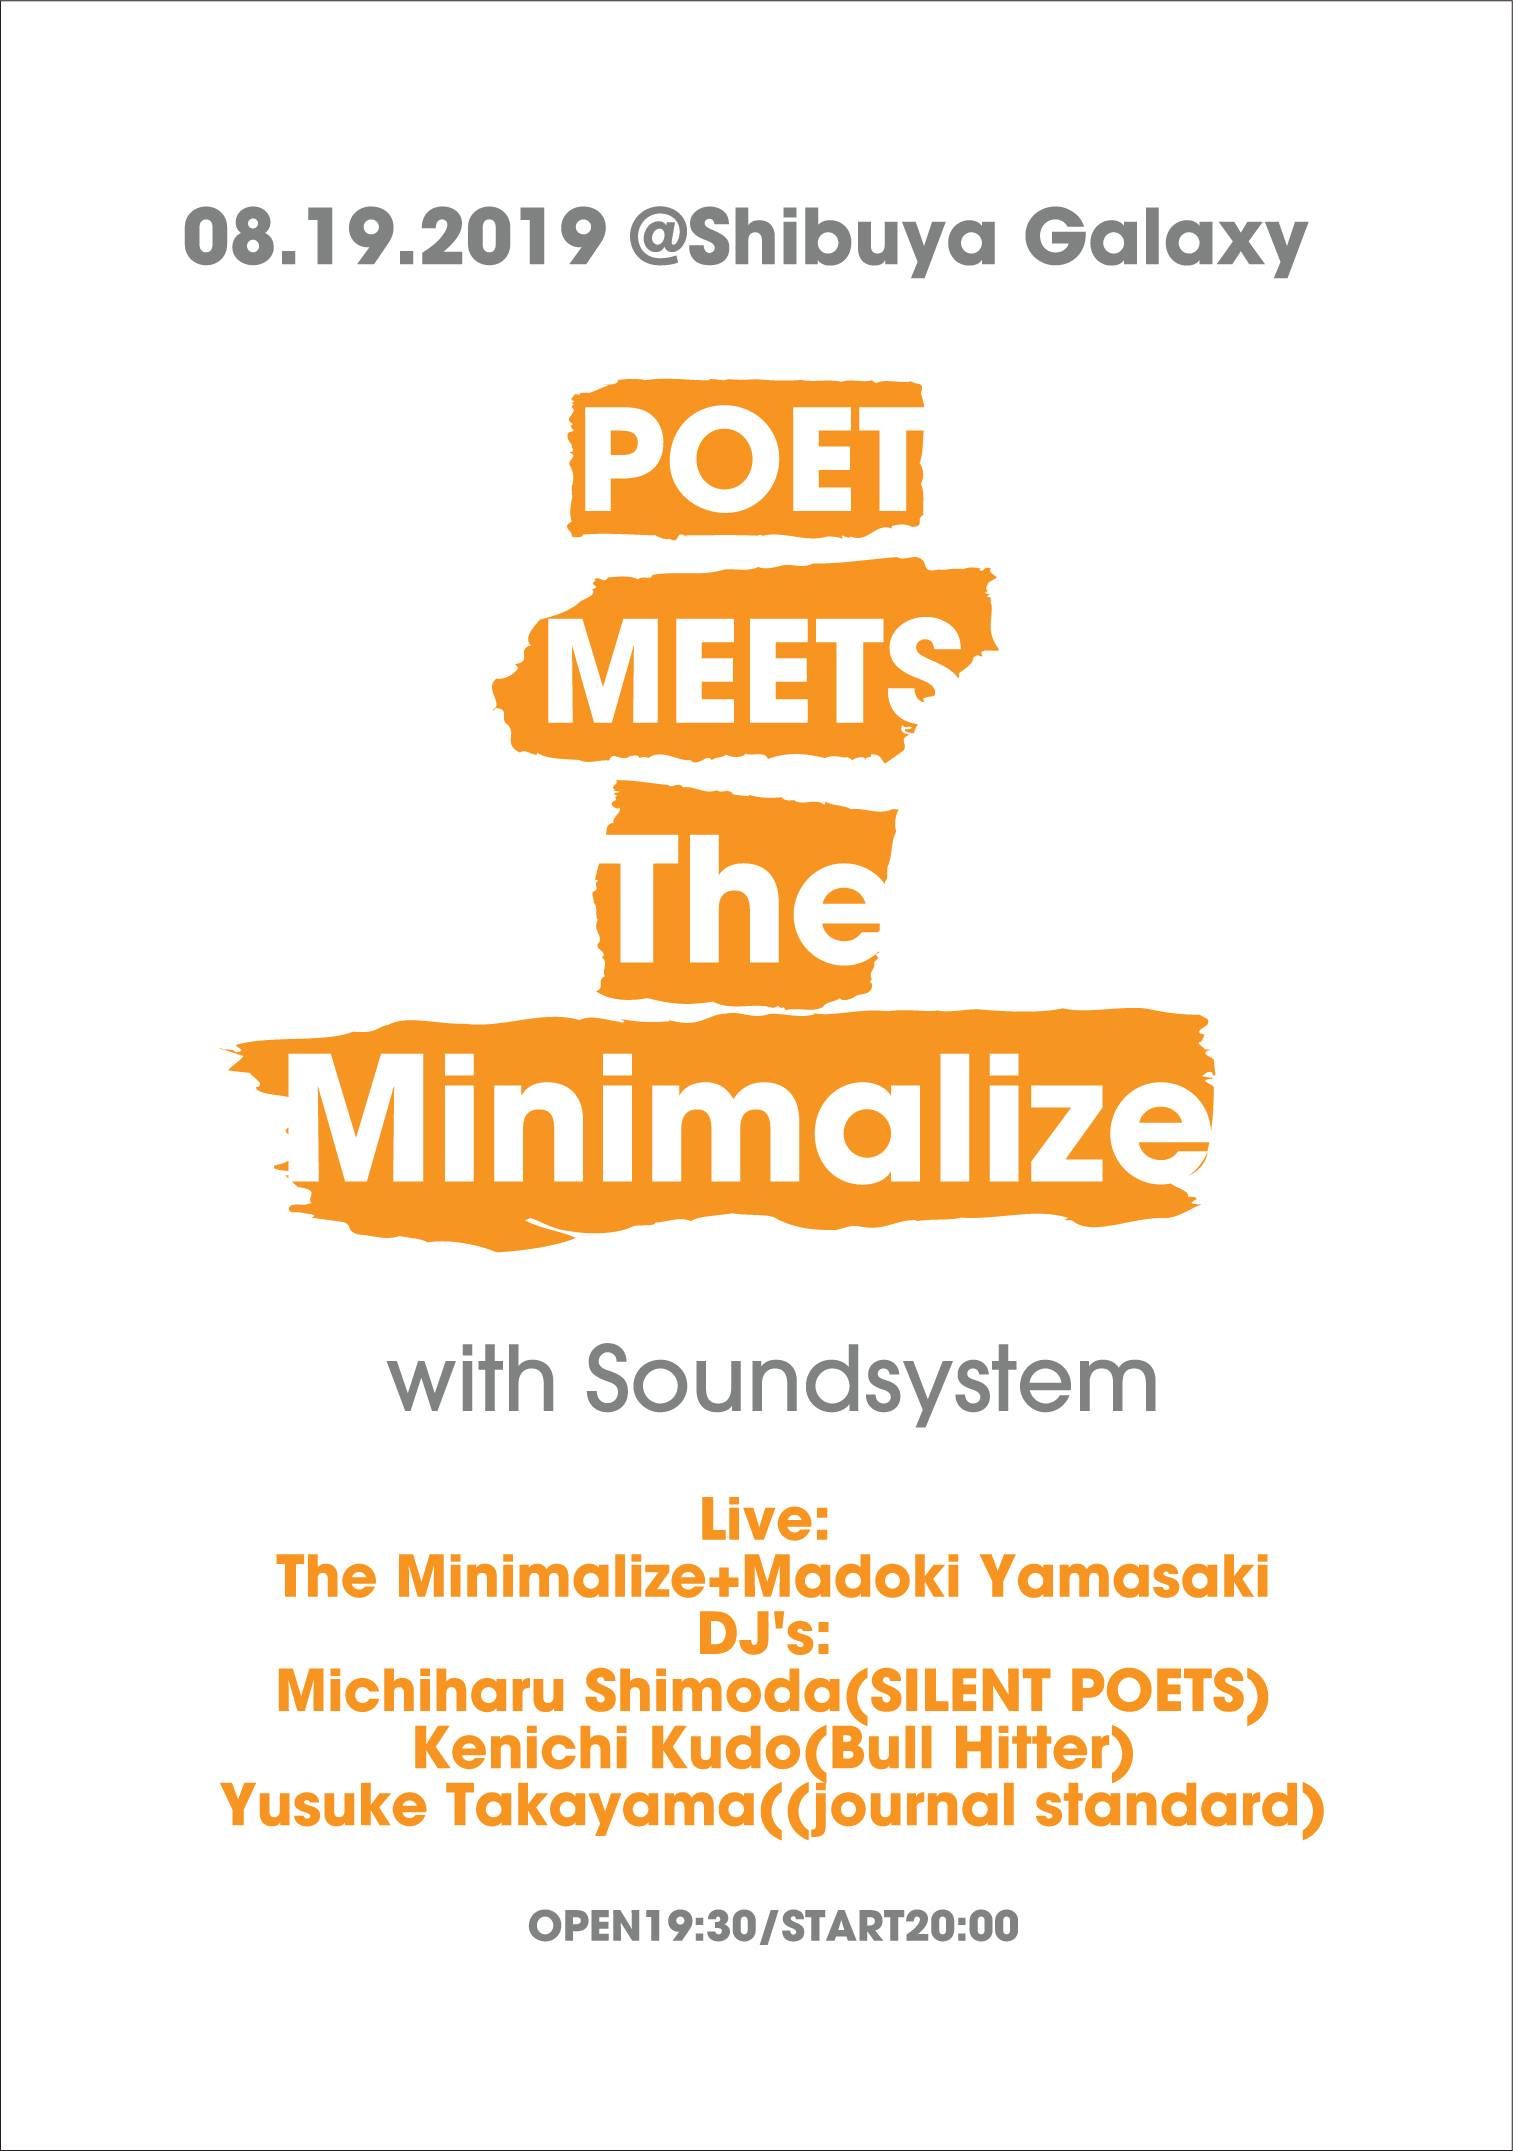 Poet Meets The Minimalize with Soundsystem